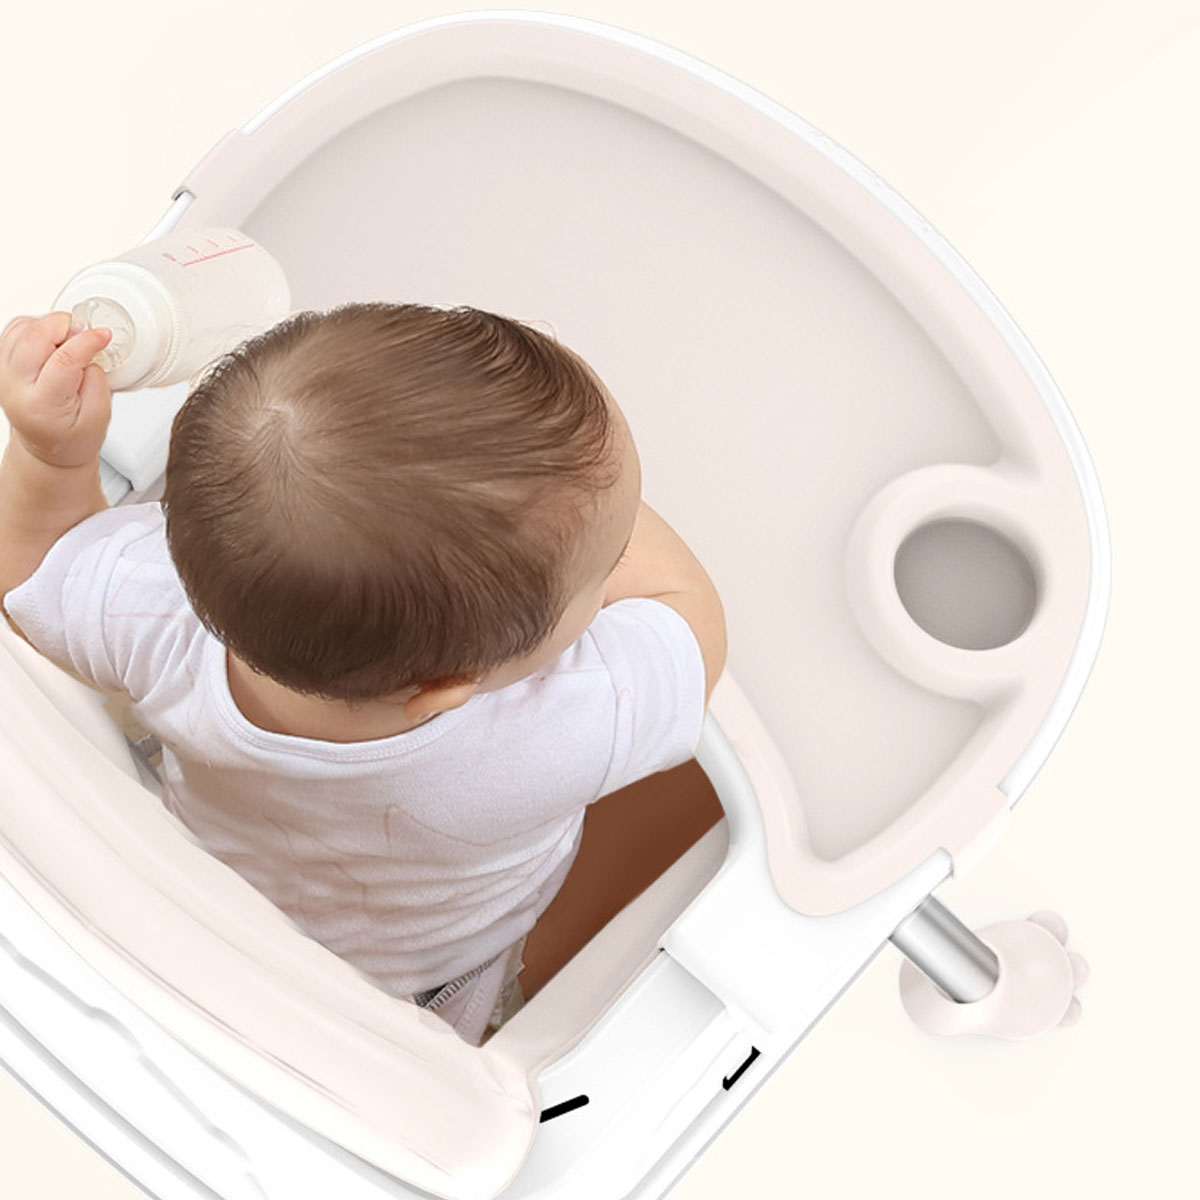 Baby-Dining-Chair-Multifunctional-Portable-Foldable-Safe-Children-Feeding-Chair-1768914-5